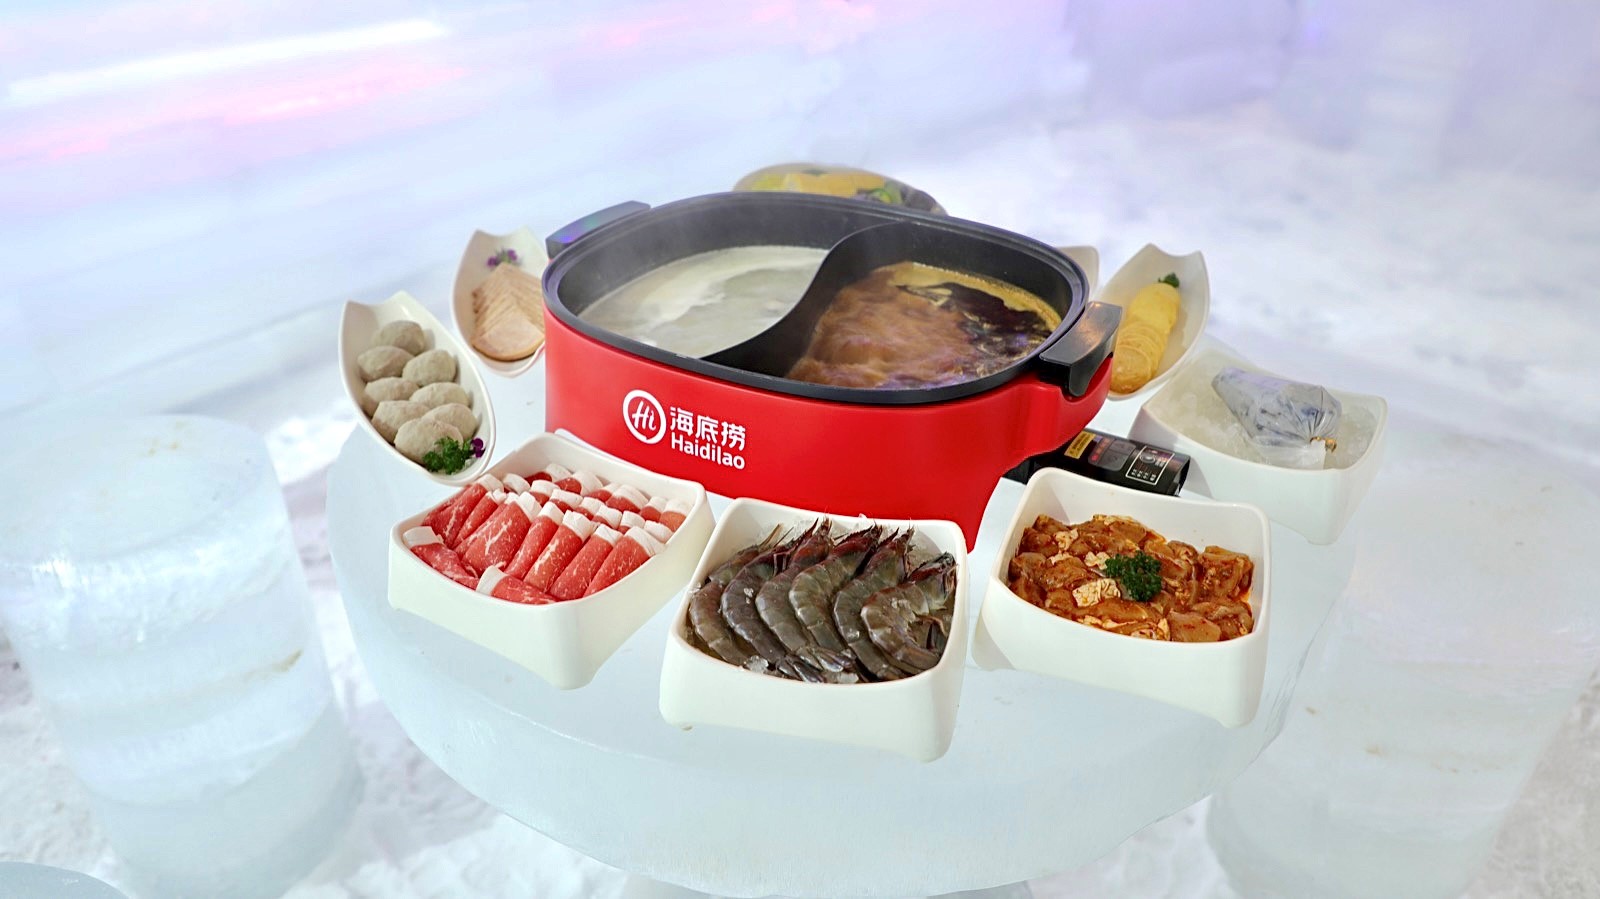 Lobang: Haidilao open first-ever pop up store in Ice Magic Singapore, providing a unique hot pot experience on ice - 5